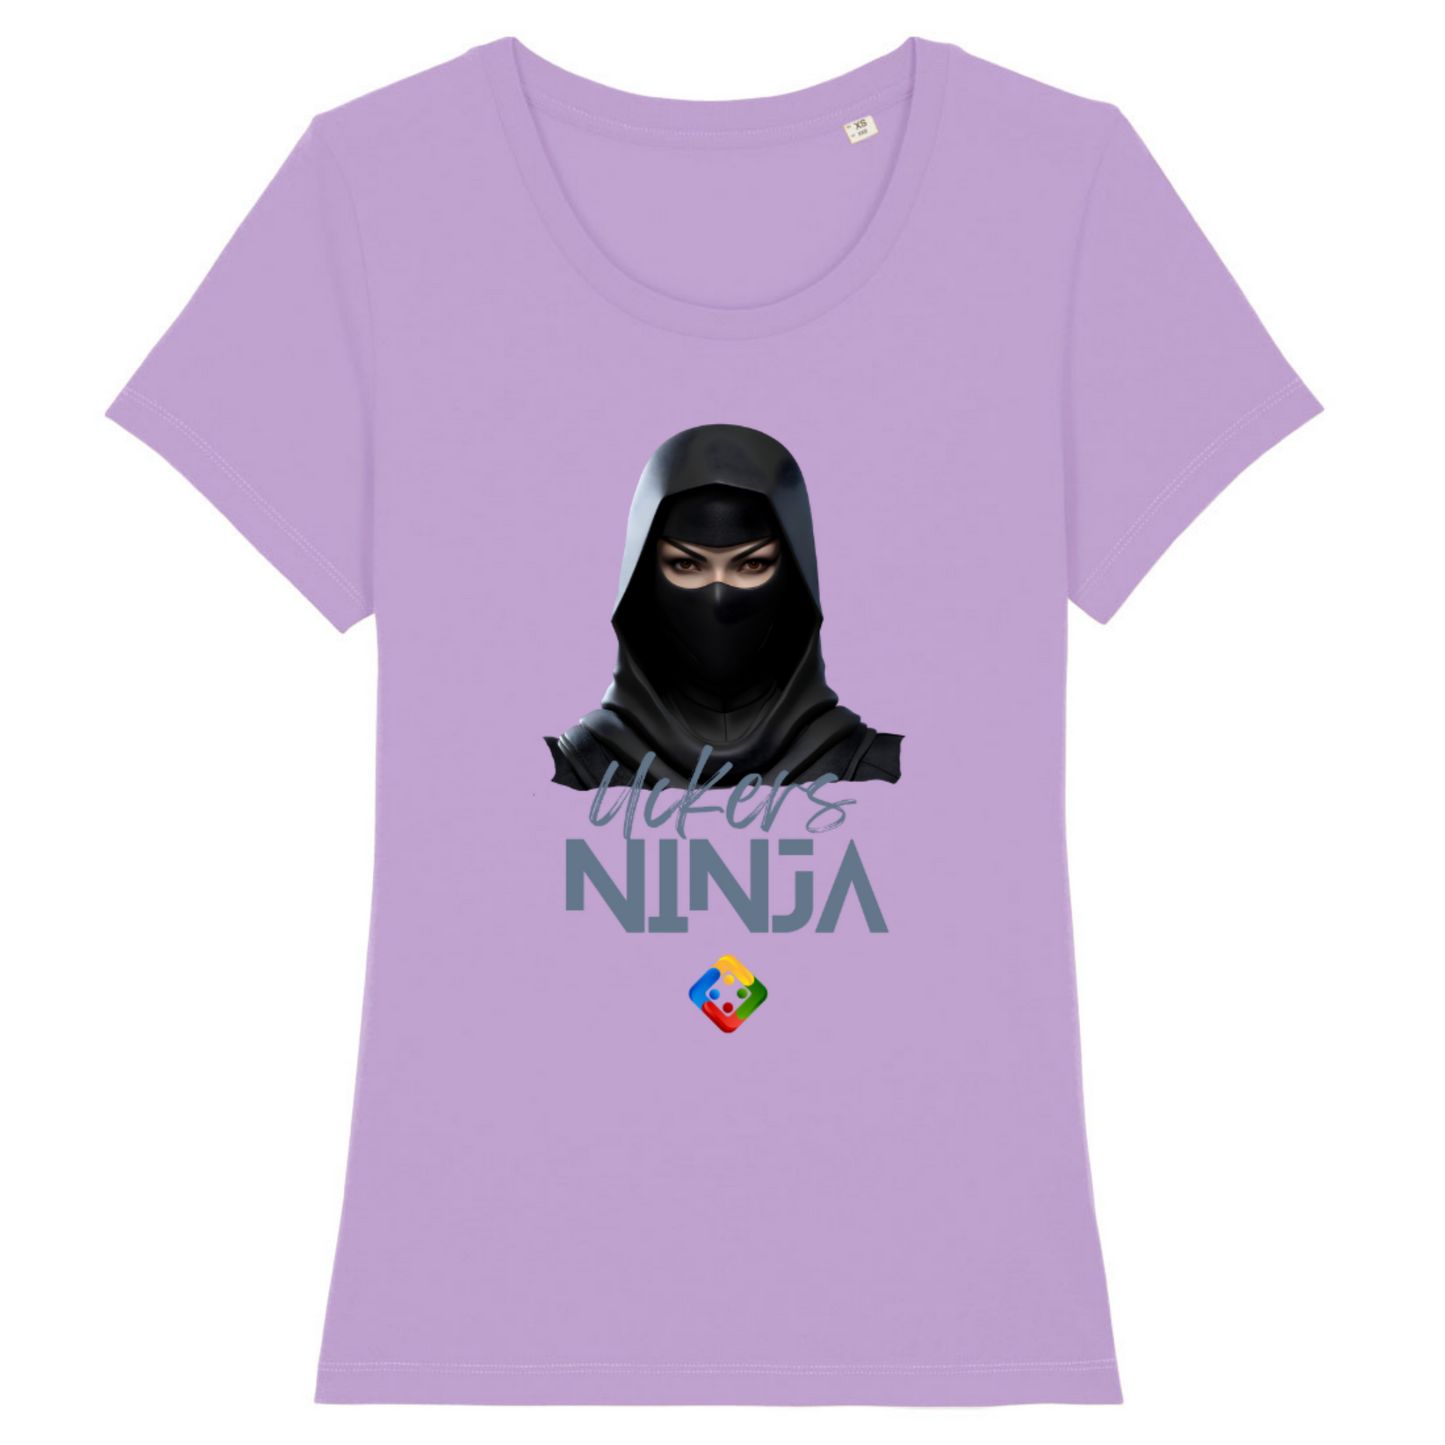 Women's organic T-shirt with printed 'Uckers Ninja' design. Available in 14 colours.